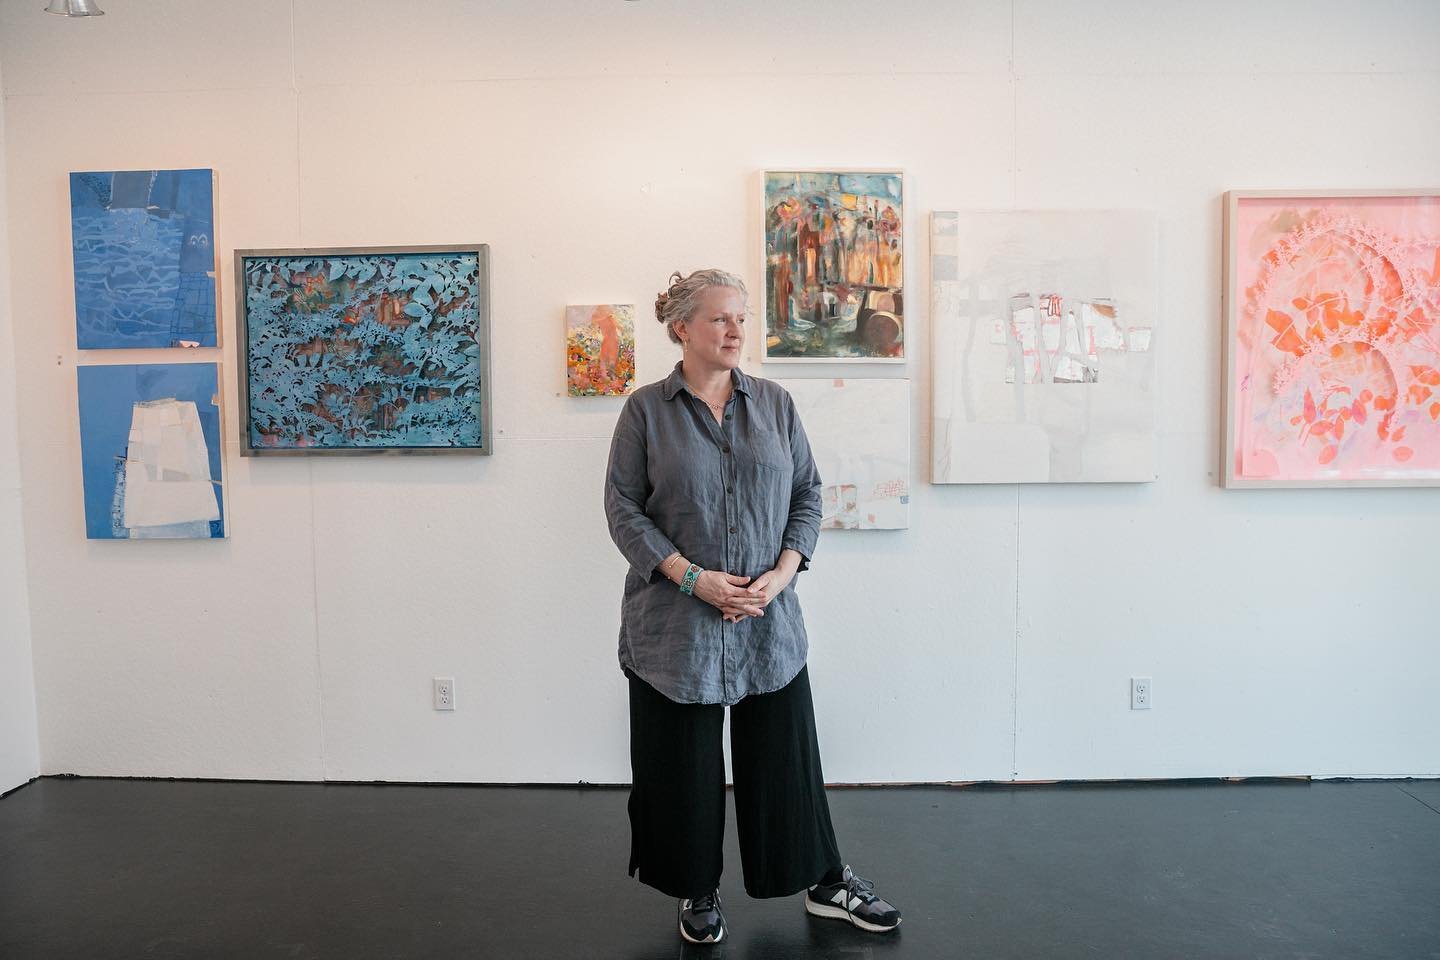 Meet Maddy. She started @sidlehousemaine in a 100 year old barn in Freeport. When I asked her what&rsquo;s one thing she wished people knew her work? She responded with, &ldquo;Art is for everybody. I want the exhibitions and my space to feel widely 